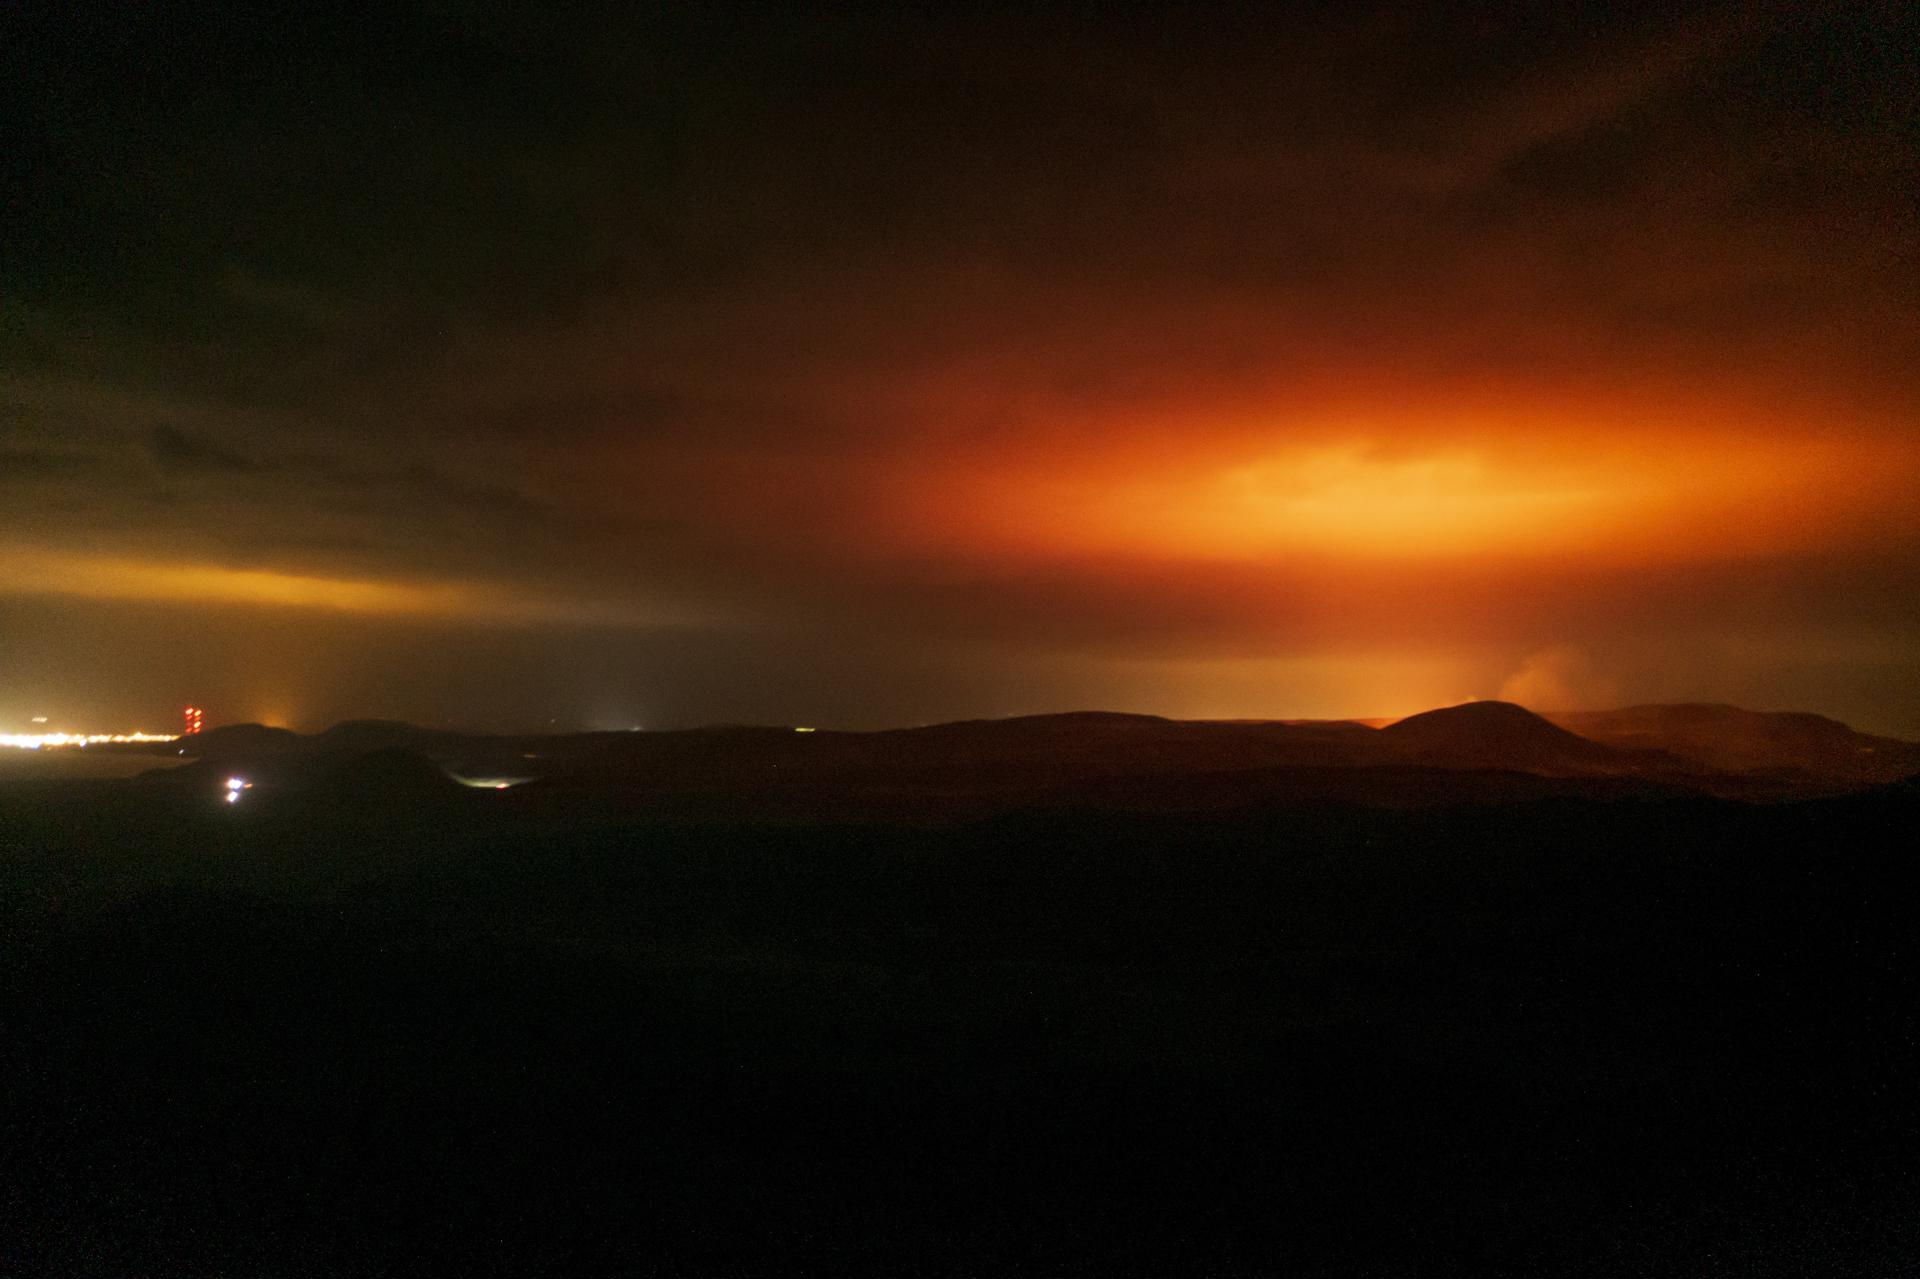 (FILE) The red glare from the volcano eruption lights the night sky over Grindavik (L) on the Reykjanes Peninsula, Iceland, early 20 March 2021 (picture taken with a drone). EFE/EPA/GOLLI / ICELANDREVIEW MANDATORY CREDIT